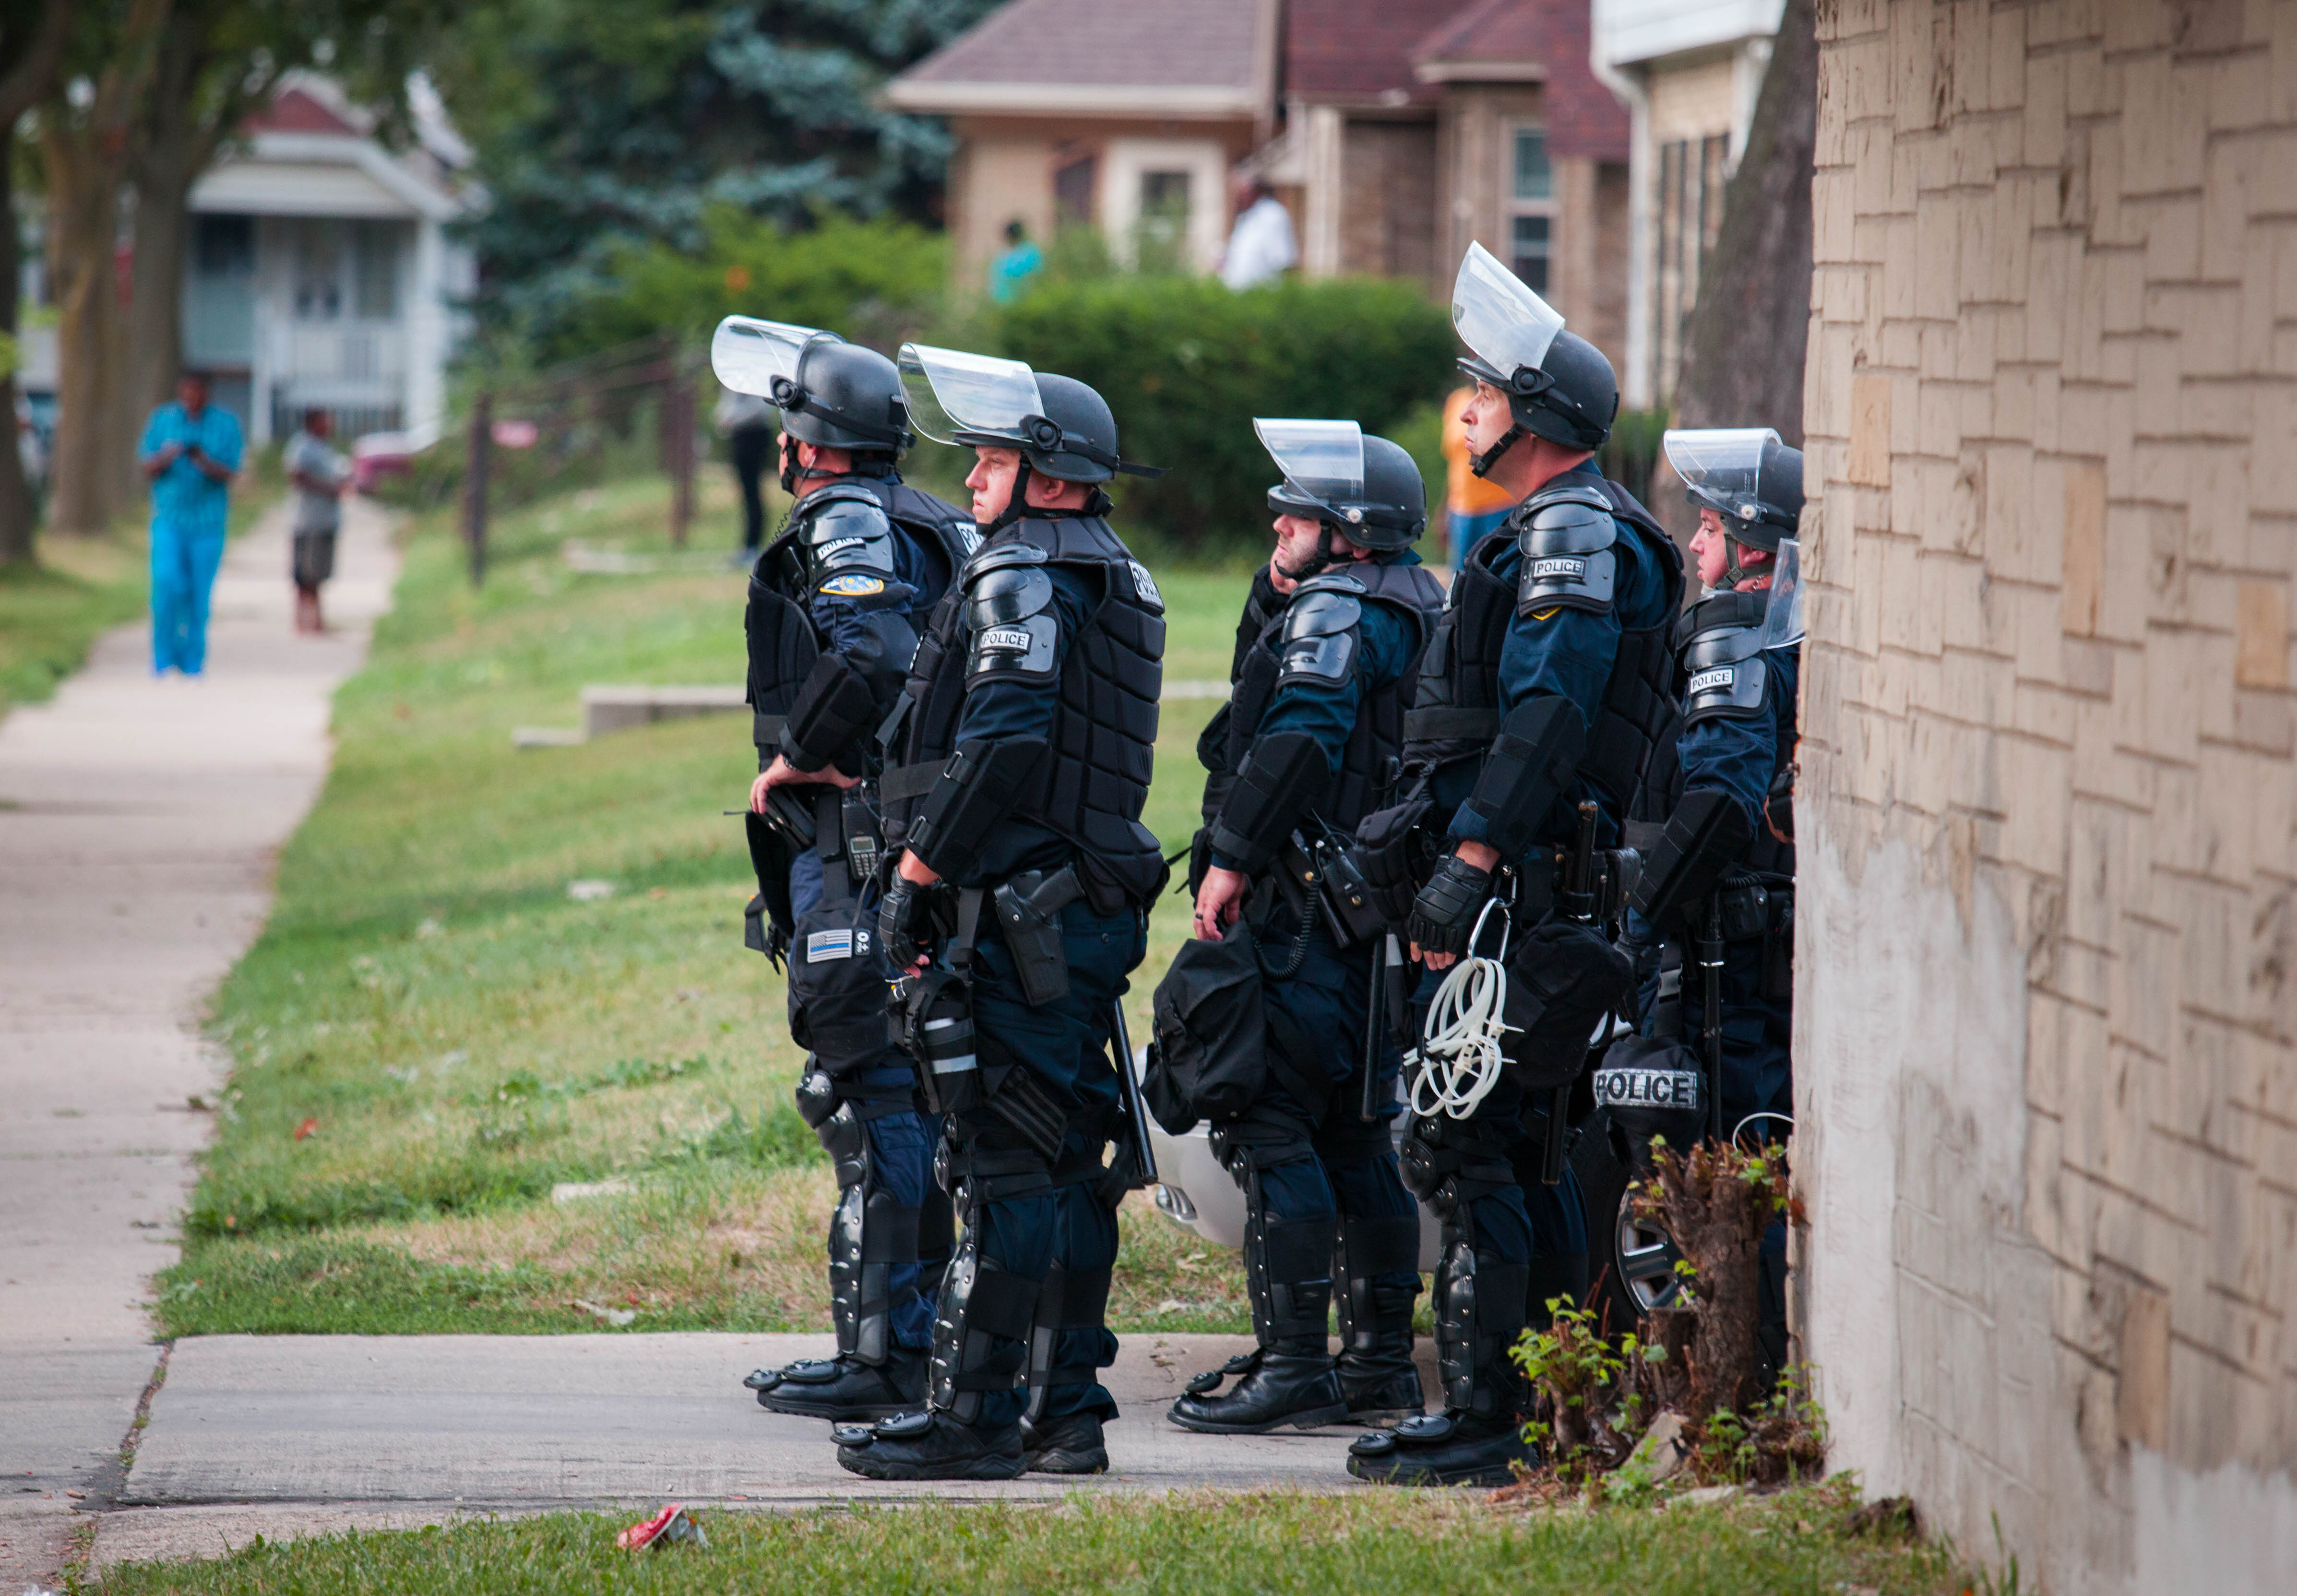 Police in riot gear wait in an alley after a second night of clashes between protestors and police in Milwaukee, Wisc., on Aug. 15, 2016.